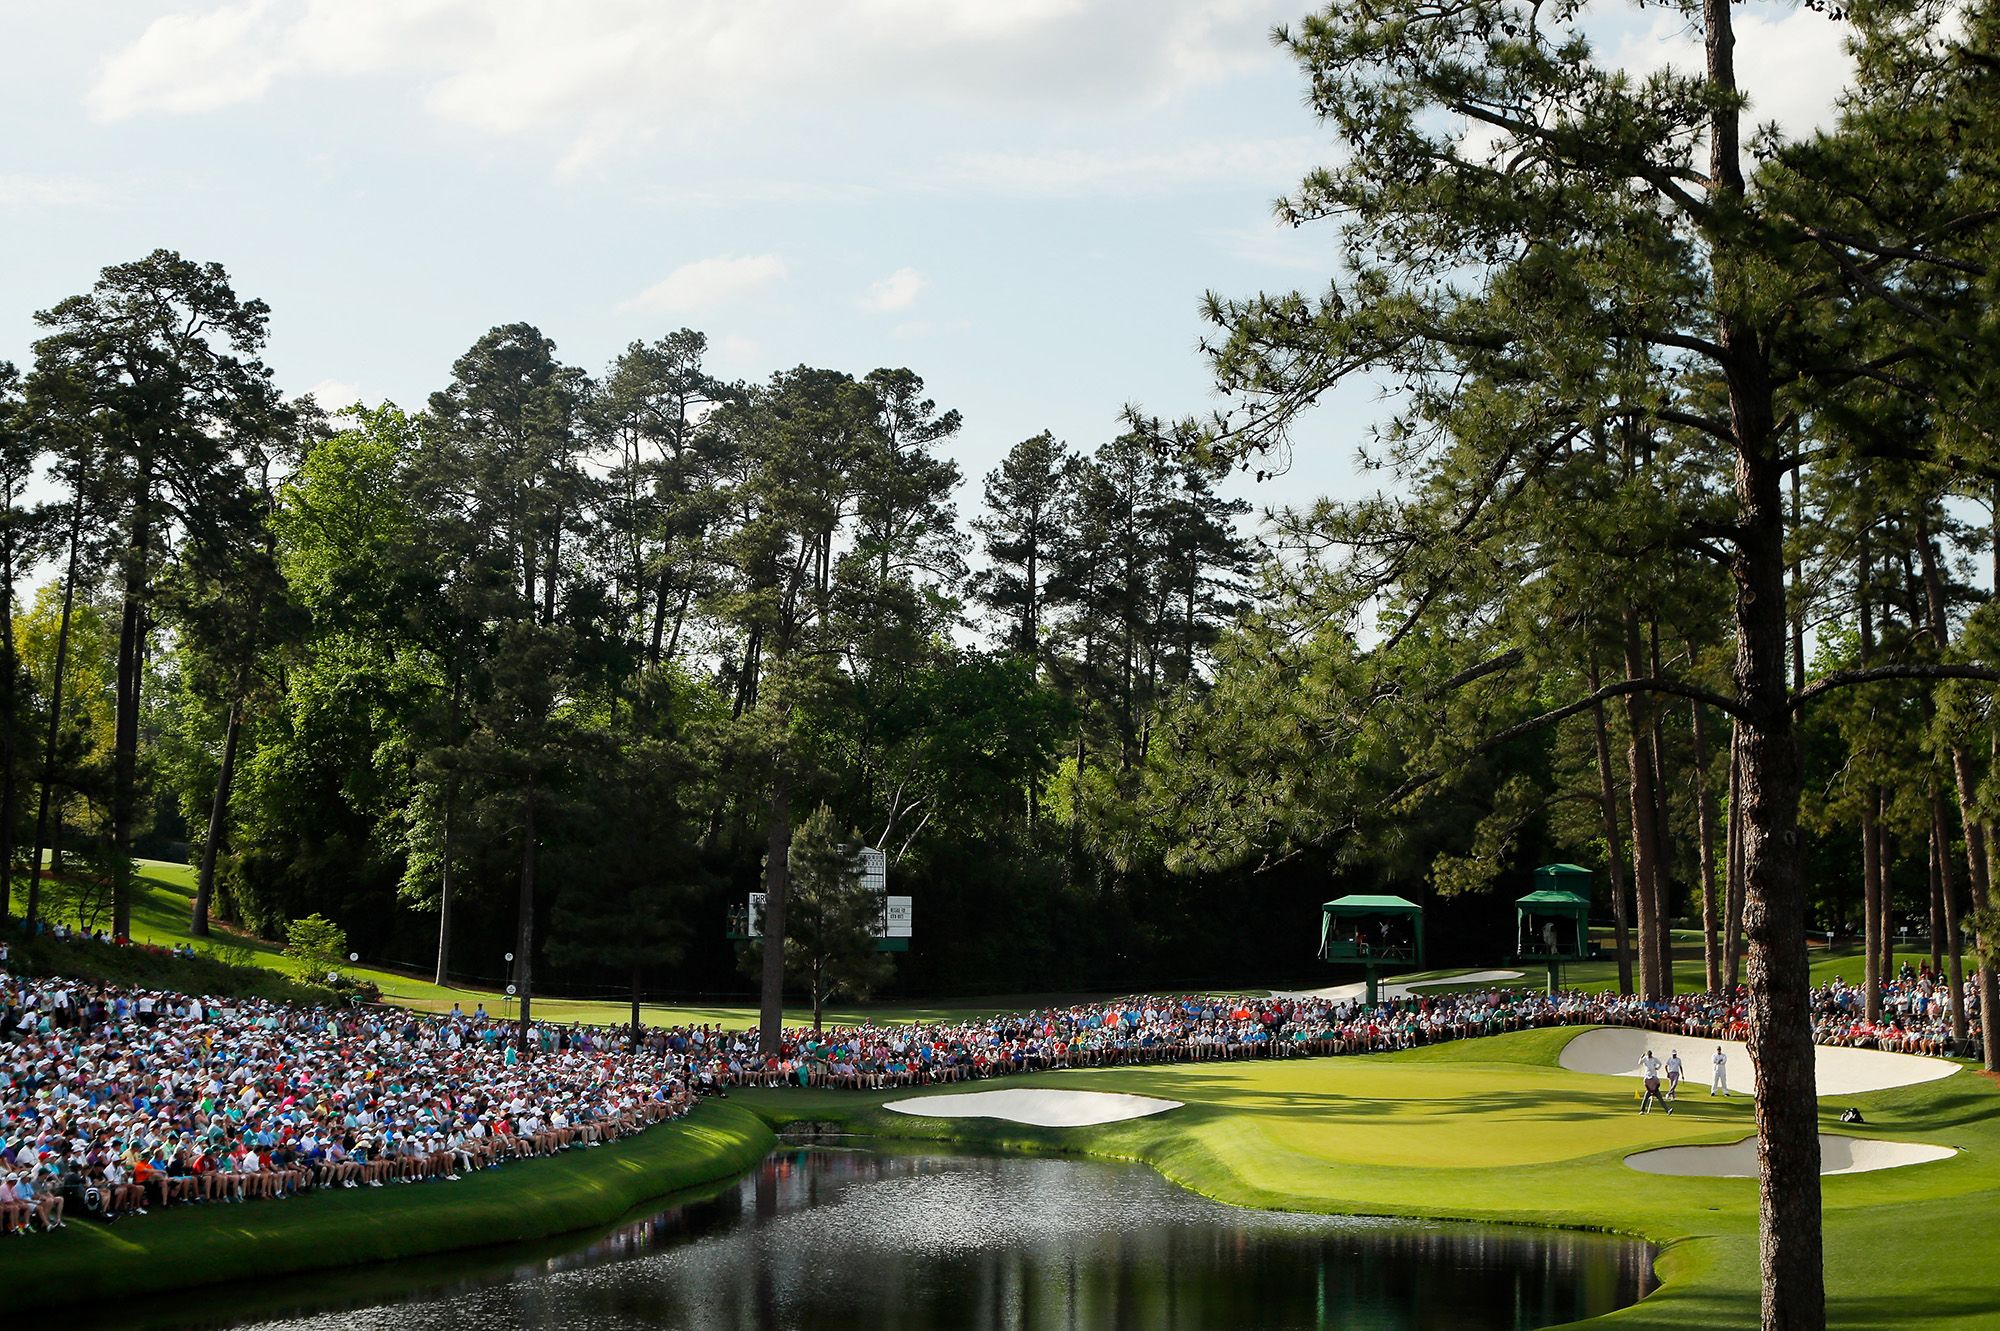 9/11 survivors' group vows to protest at Masters if Augusta National  doesn't reconsider decision allowing LIV Golf series participants to play |  CNN